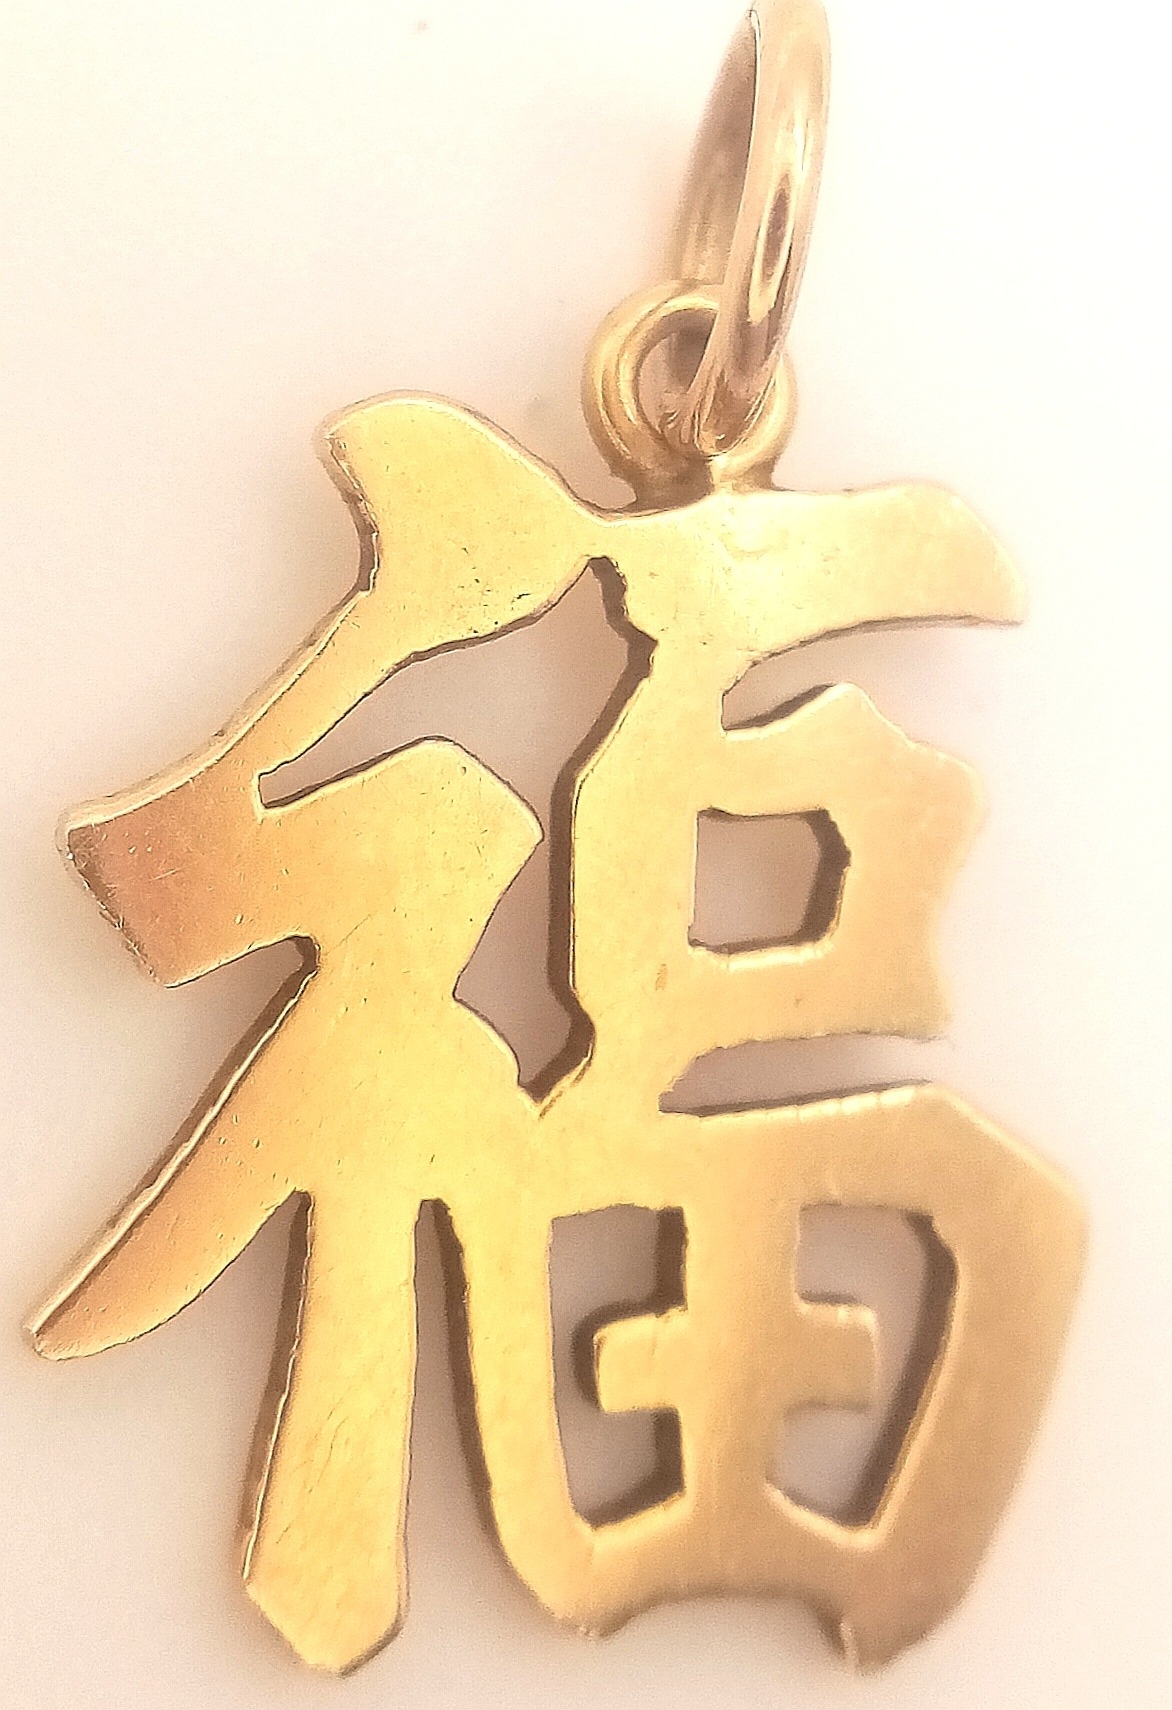 A 14K YELLOW GOLD CHINESE GOOD LUCK/HAPPINESS CHARM/PENDANT. 2.2cm, 1.7g total weight. Ref: SC 8058